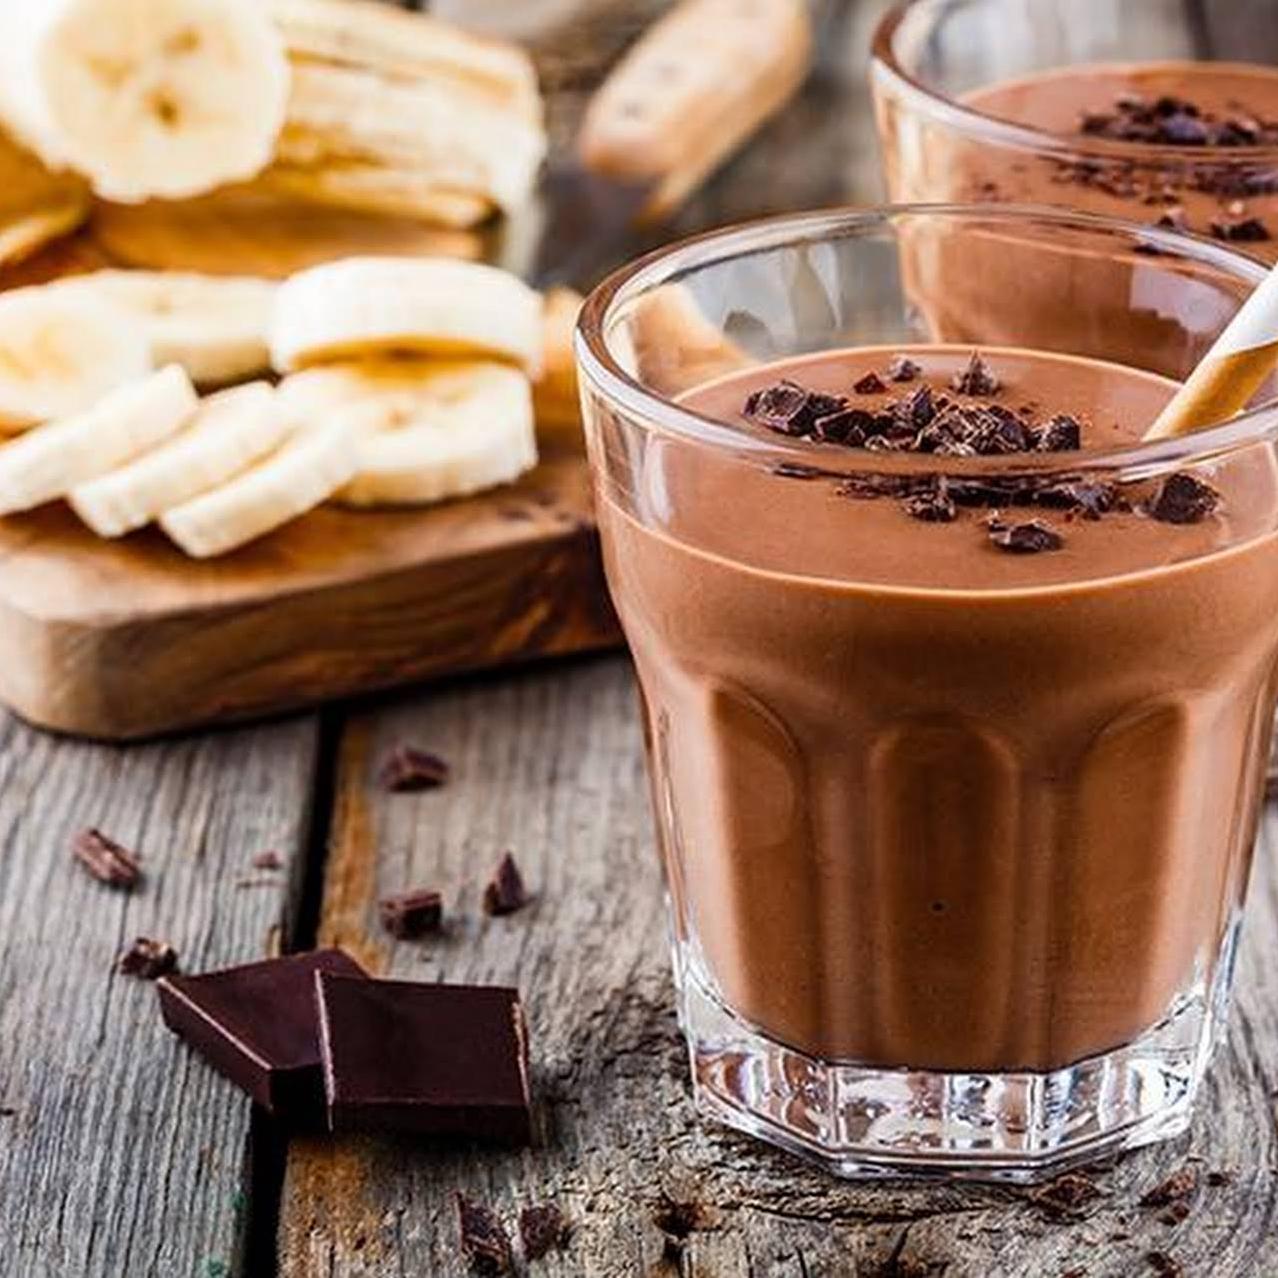  Indulge in the perfect blend of banana and chocolate flavors with our signature Chocolate Banana Coffee recipe.